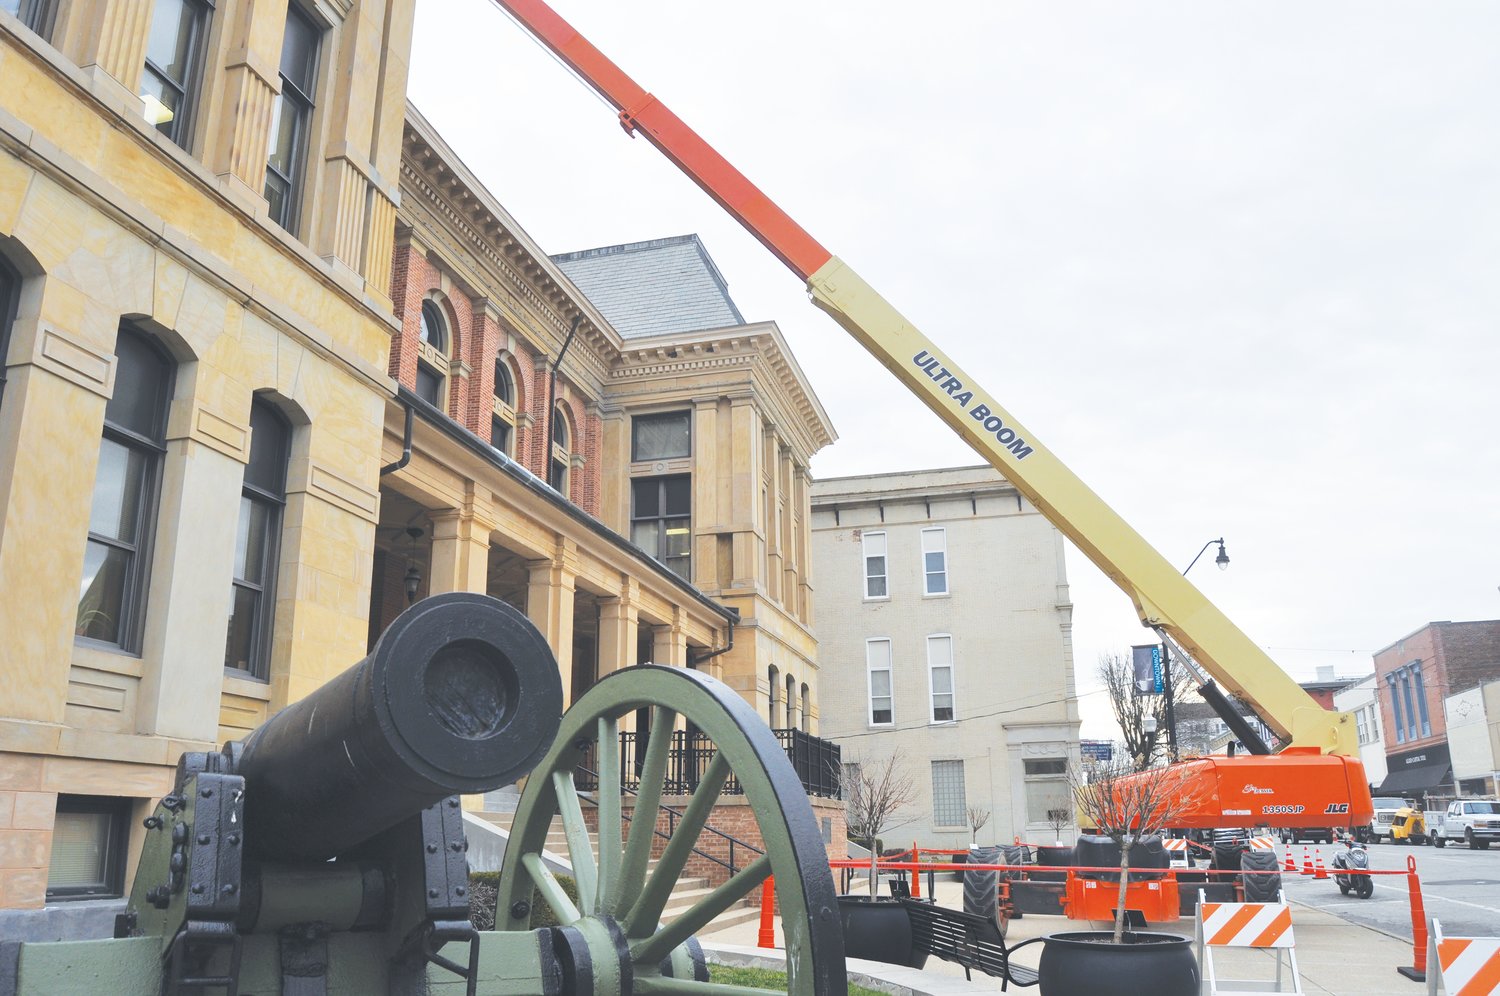 A crane reaches to the top of the Montgomery County Courthouse Tuesday. Crews from South Bend-based Midland Engineering were hired to perform gutter repairs on the courthouse. The sidewalk was closed on the south side of the building during the repairs.